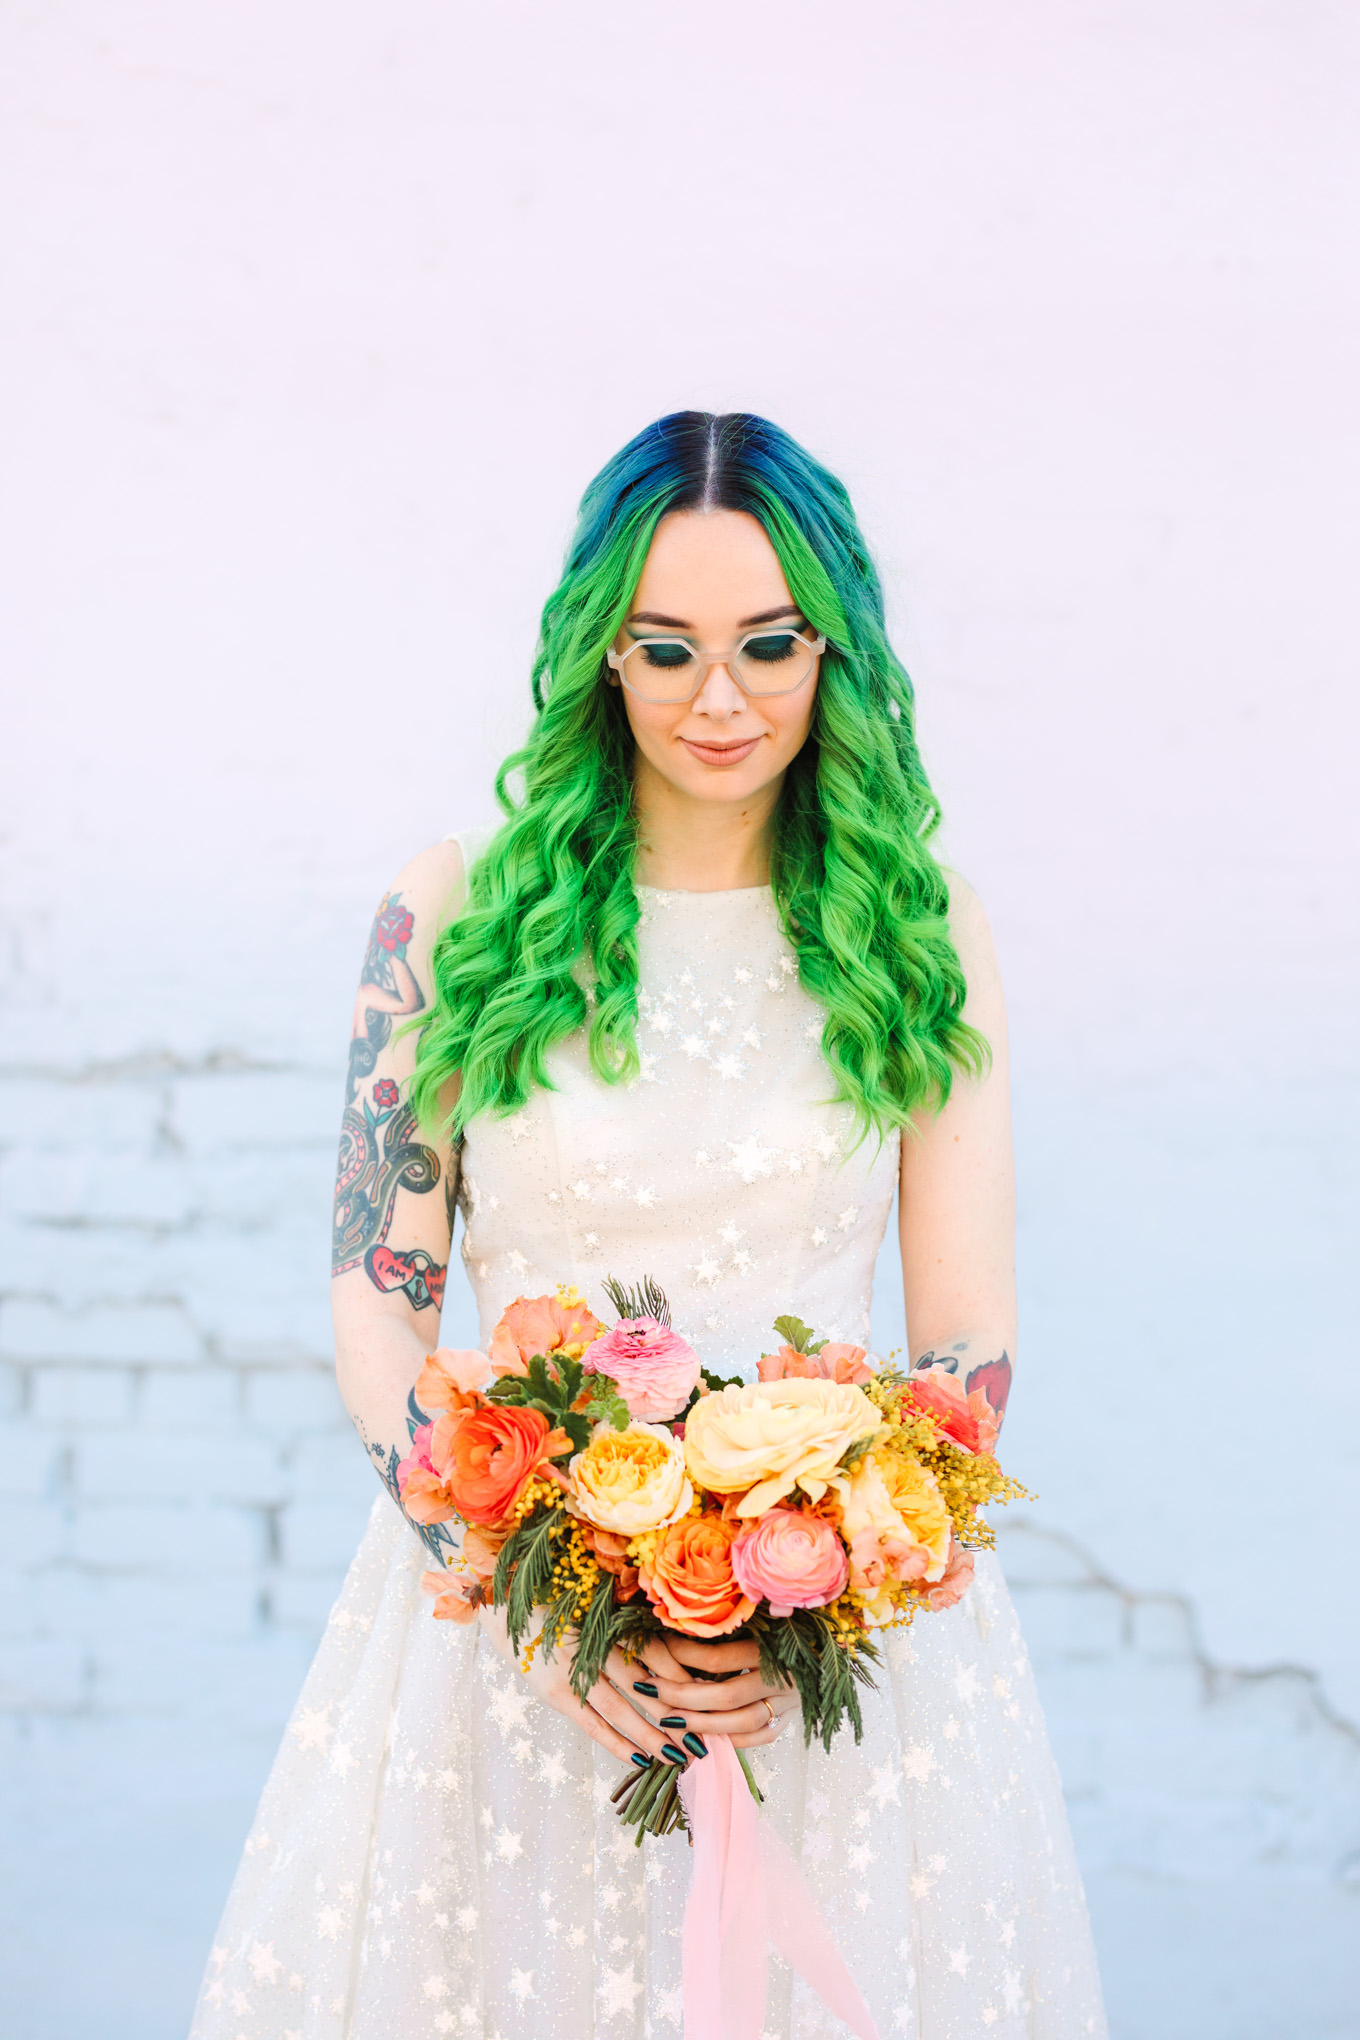 Bride with green ombre hair wearing cute glasses | Colorful wedding at The Unique Space Los Angeles published in The Knot Magazine | Fresh and colorful photography for fun-loving couples in Southern California | #colorfulwedding #losangeleswedding #weddingphotography #uniquespace Source: Mary Costa Photography | Los Angeles